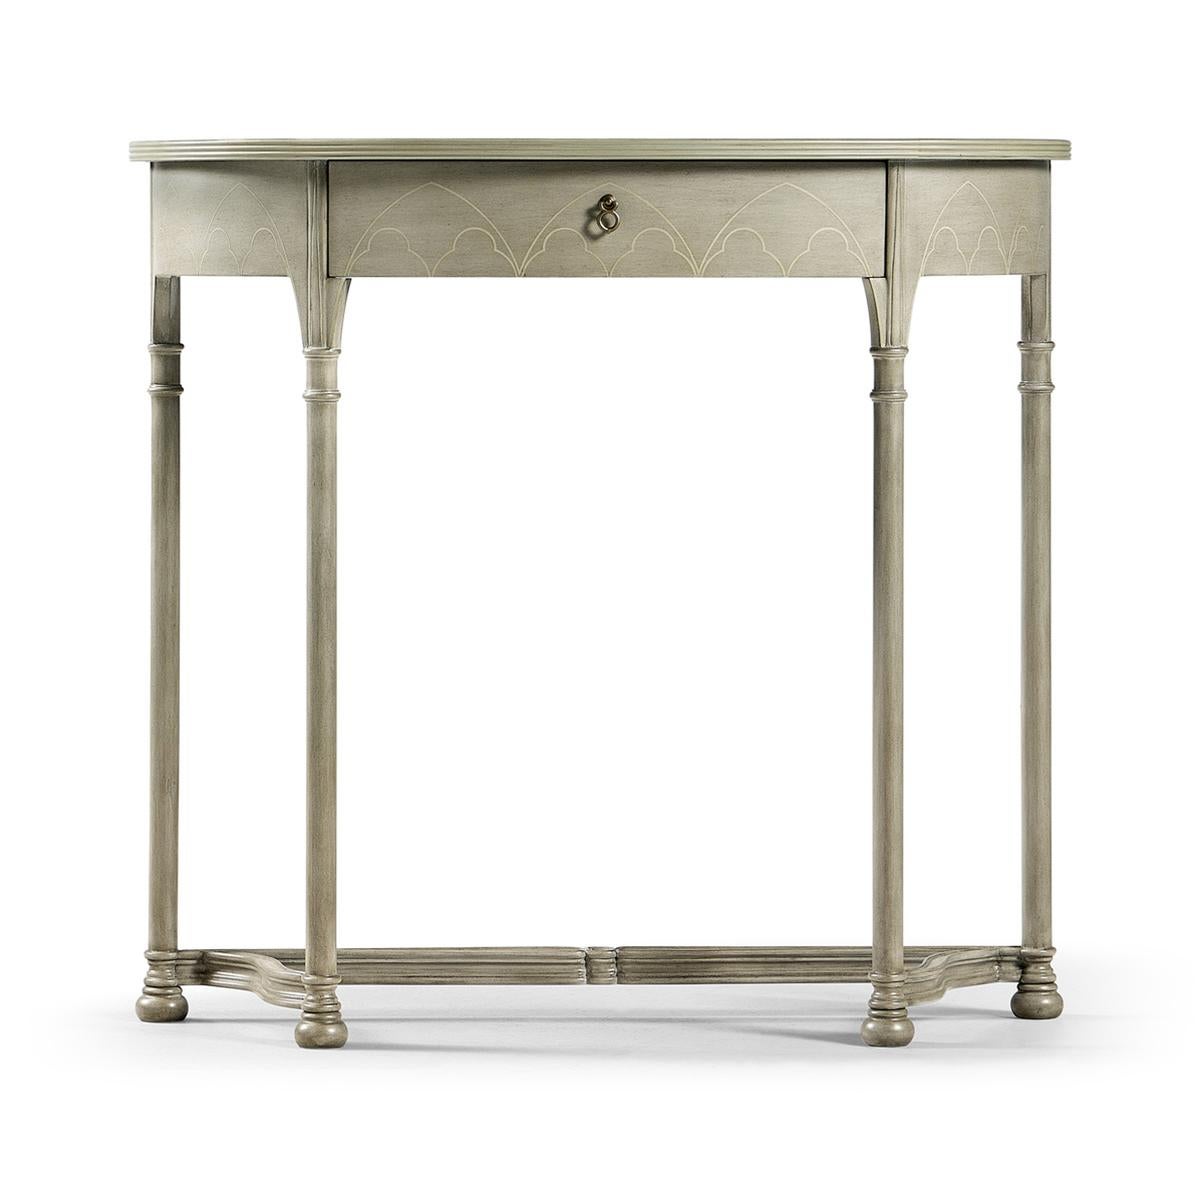 A Gothic painted console table with an antique grey finish, in an 18th-century gothic style, the demilune half-round form with fine contrasting inlays to the top and frieze, and legs with painted running floral motifs and arches.

Dimensions: 34